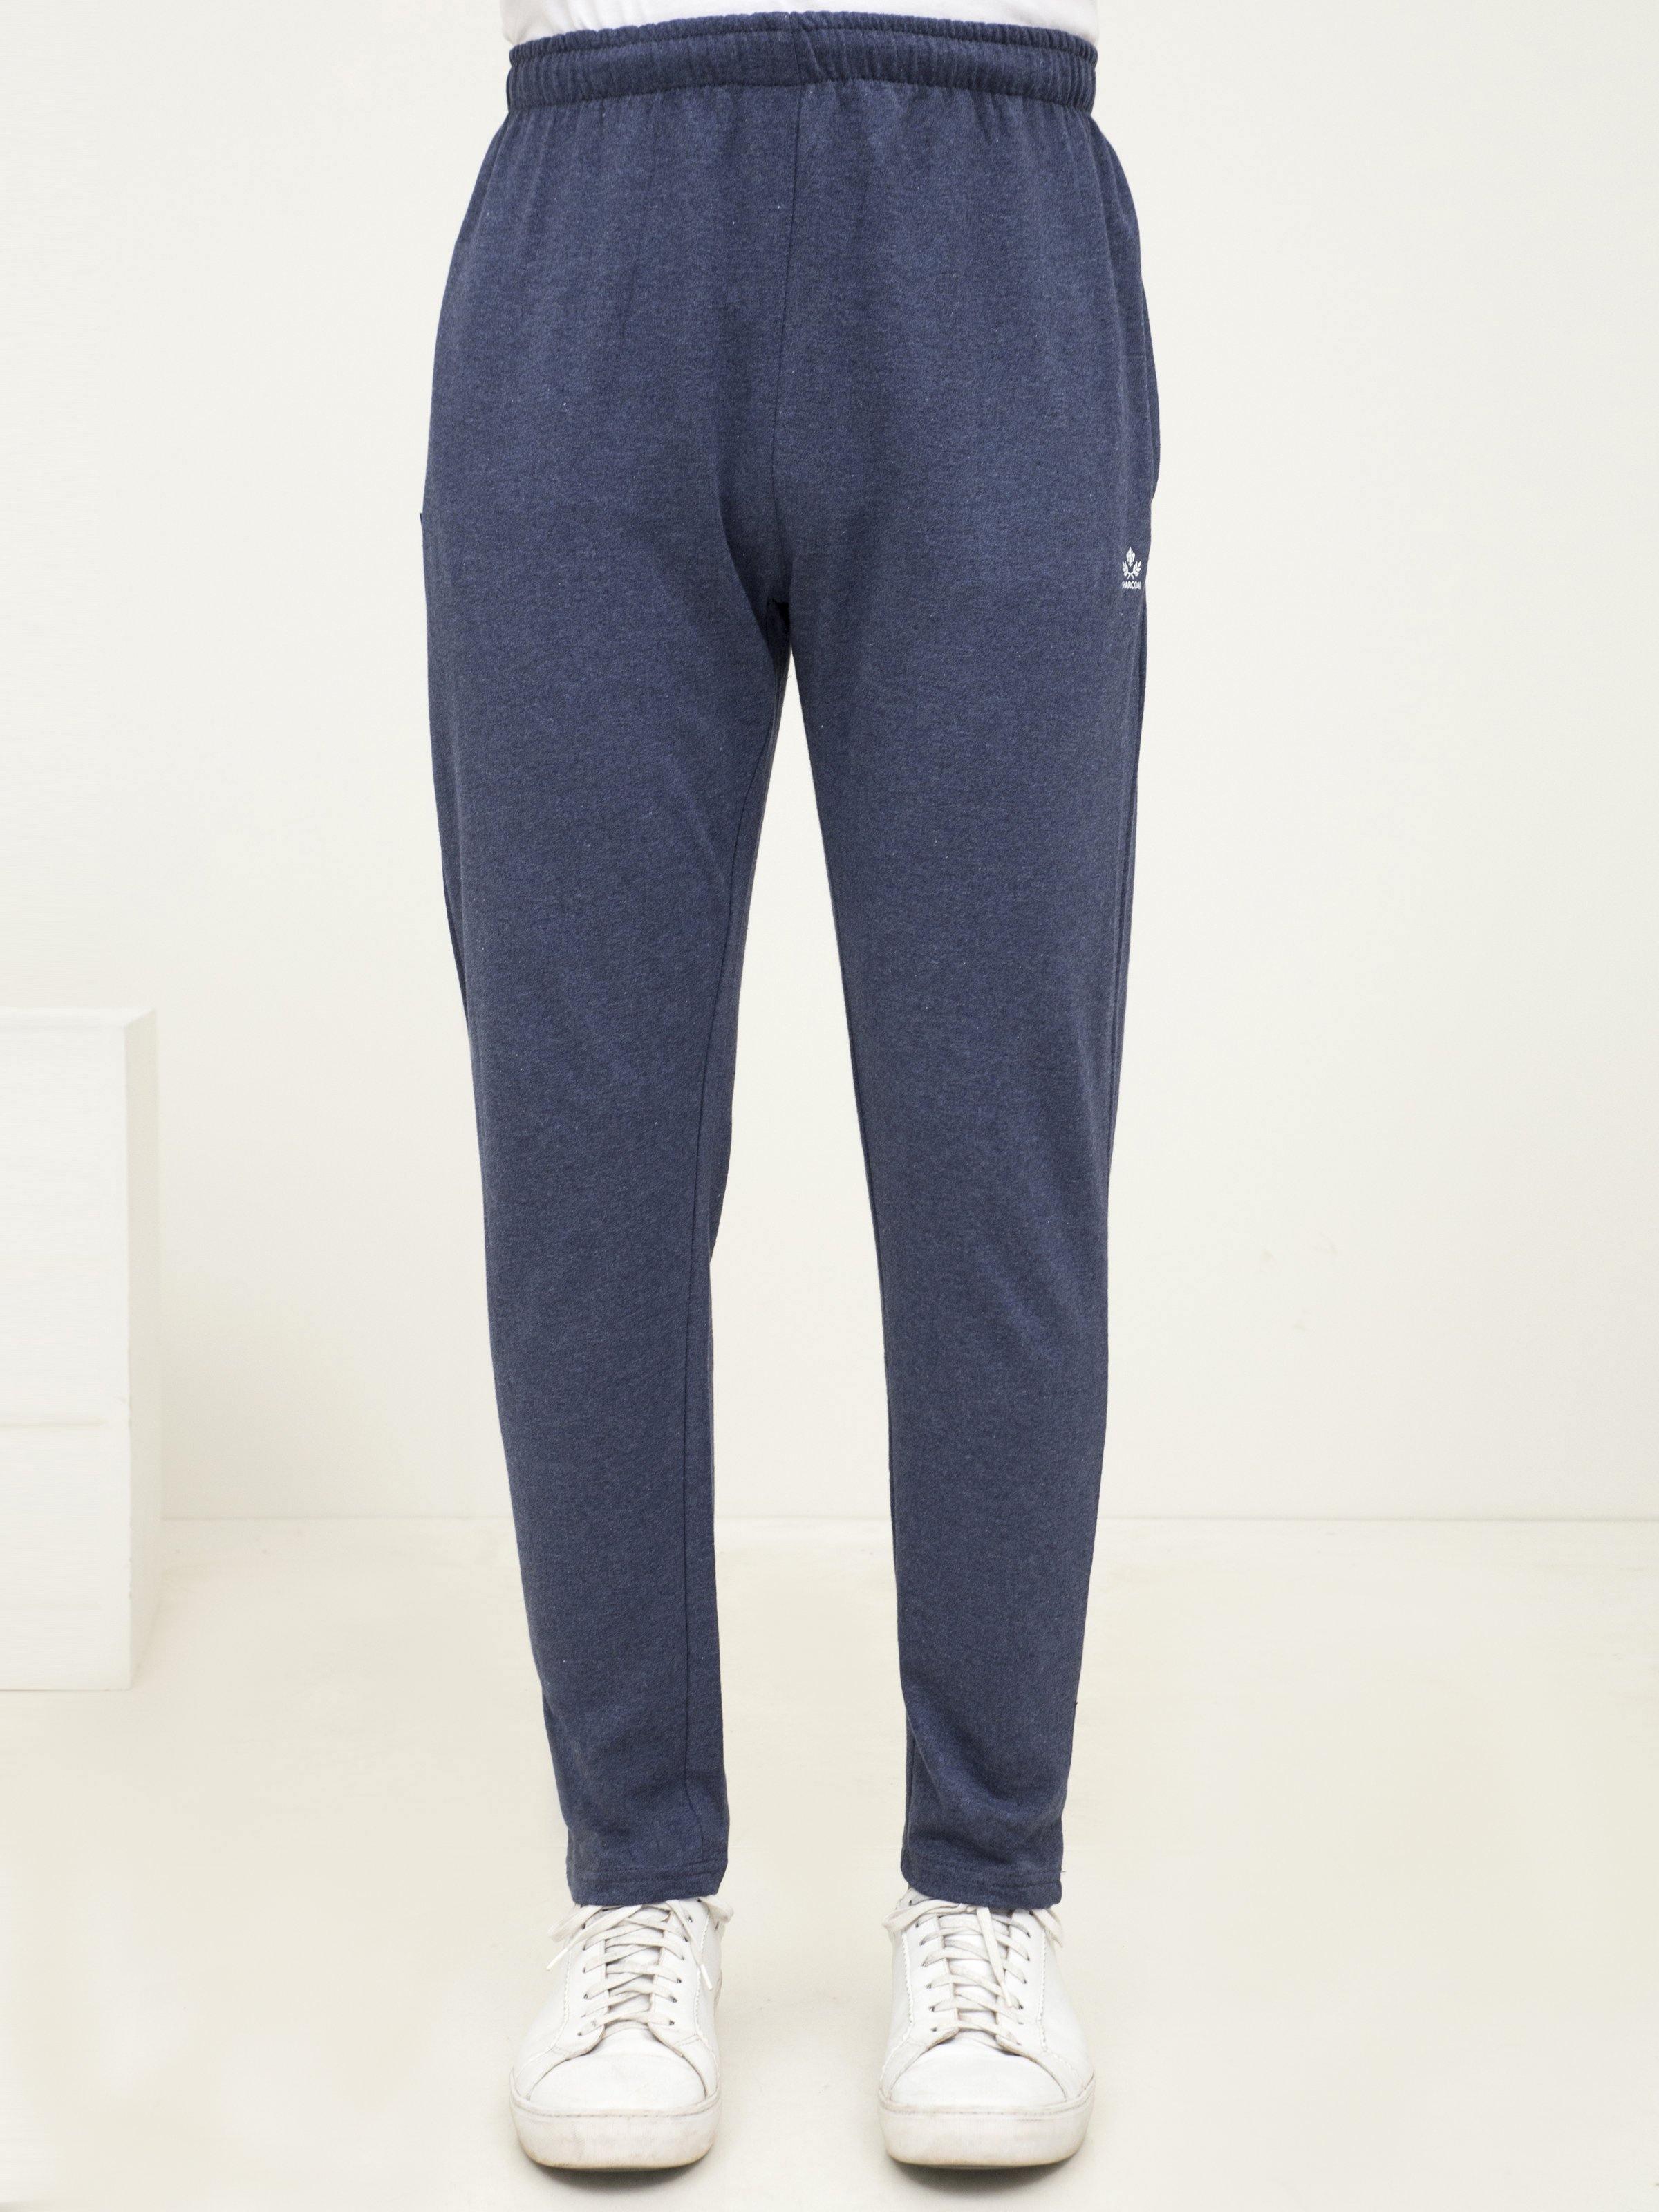 CASUAL TROUSER KNITE SLEEPWEAR INDEGO MELANGE at Charcoal Clothing